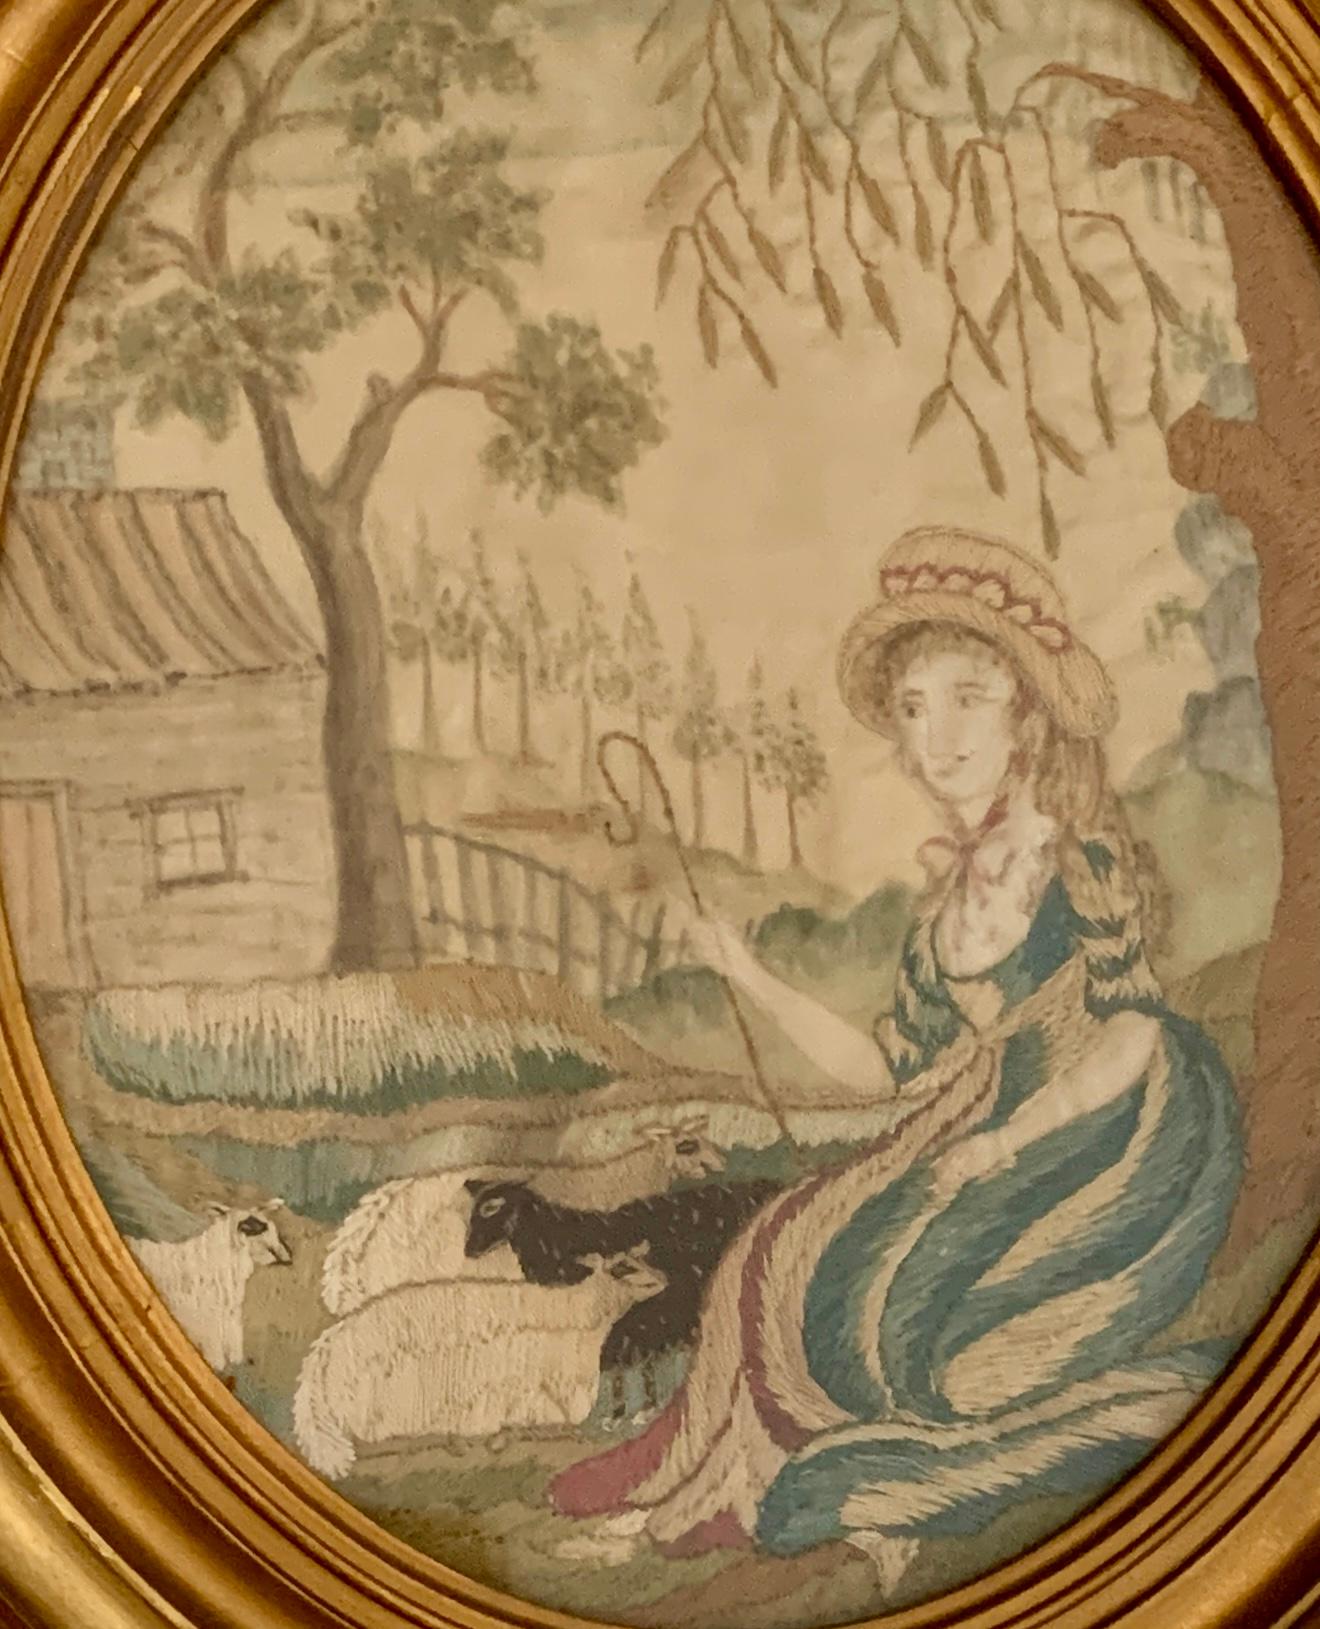 The shepherdess is lovely. She is seated near her flock under the shade of a leafy tree, wearing a green and white dress and a hat with red trim. Nearby we see a house with a fence.
The frame is later.
Dimensions: 12.75